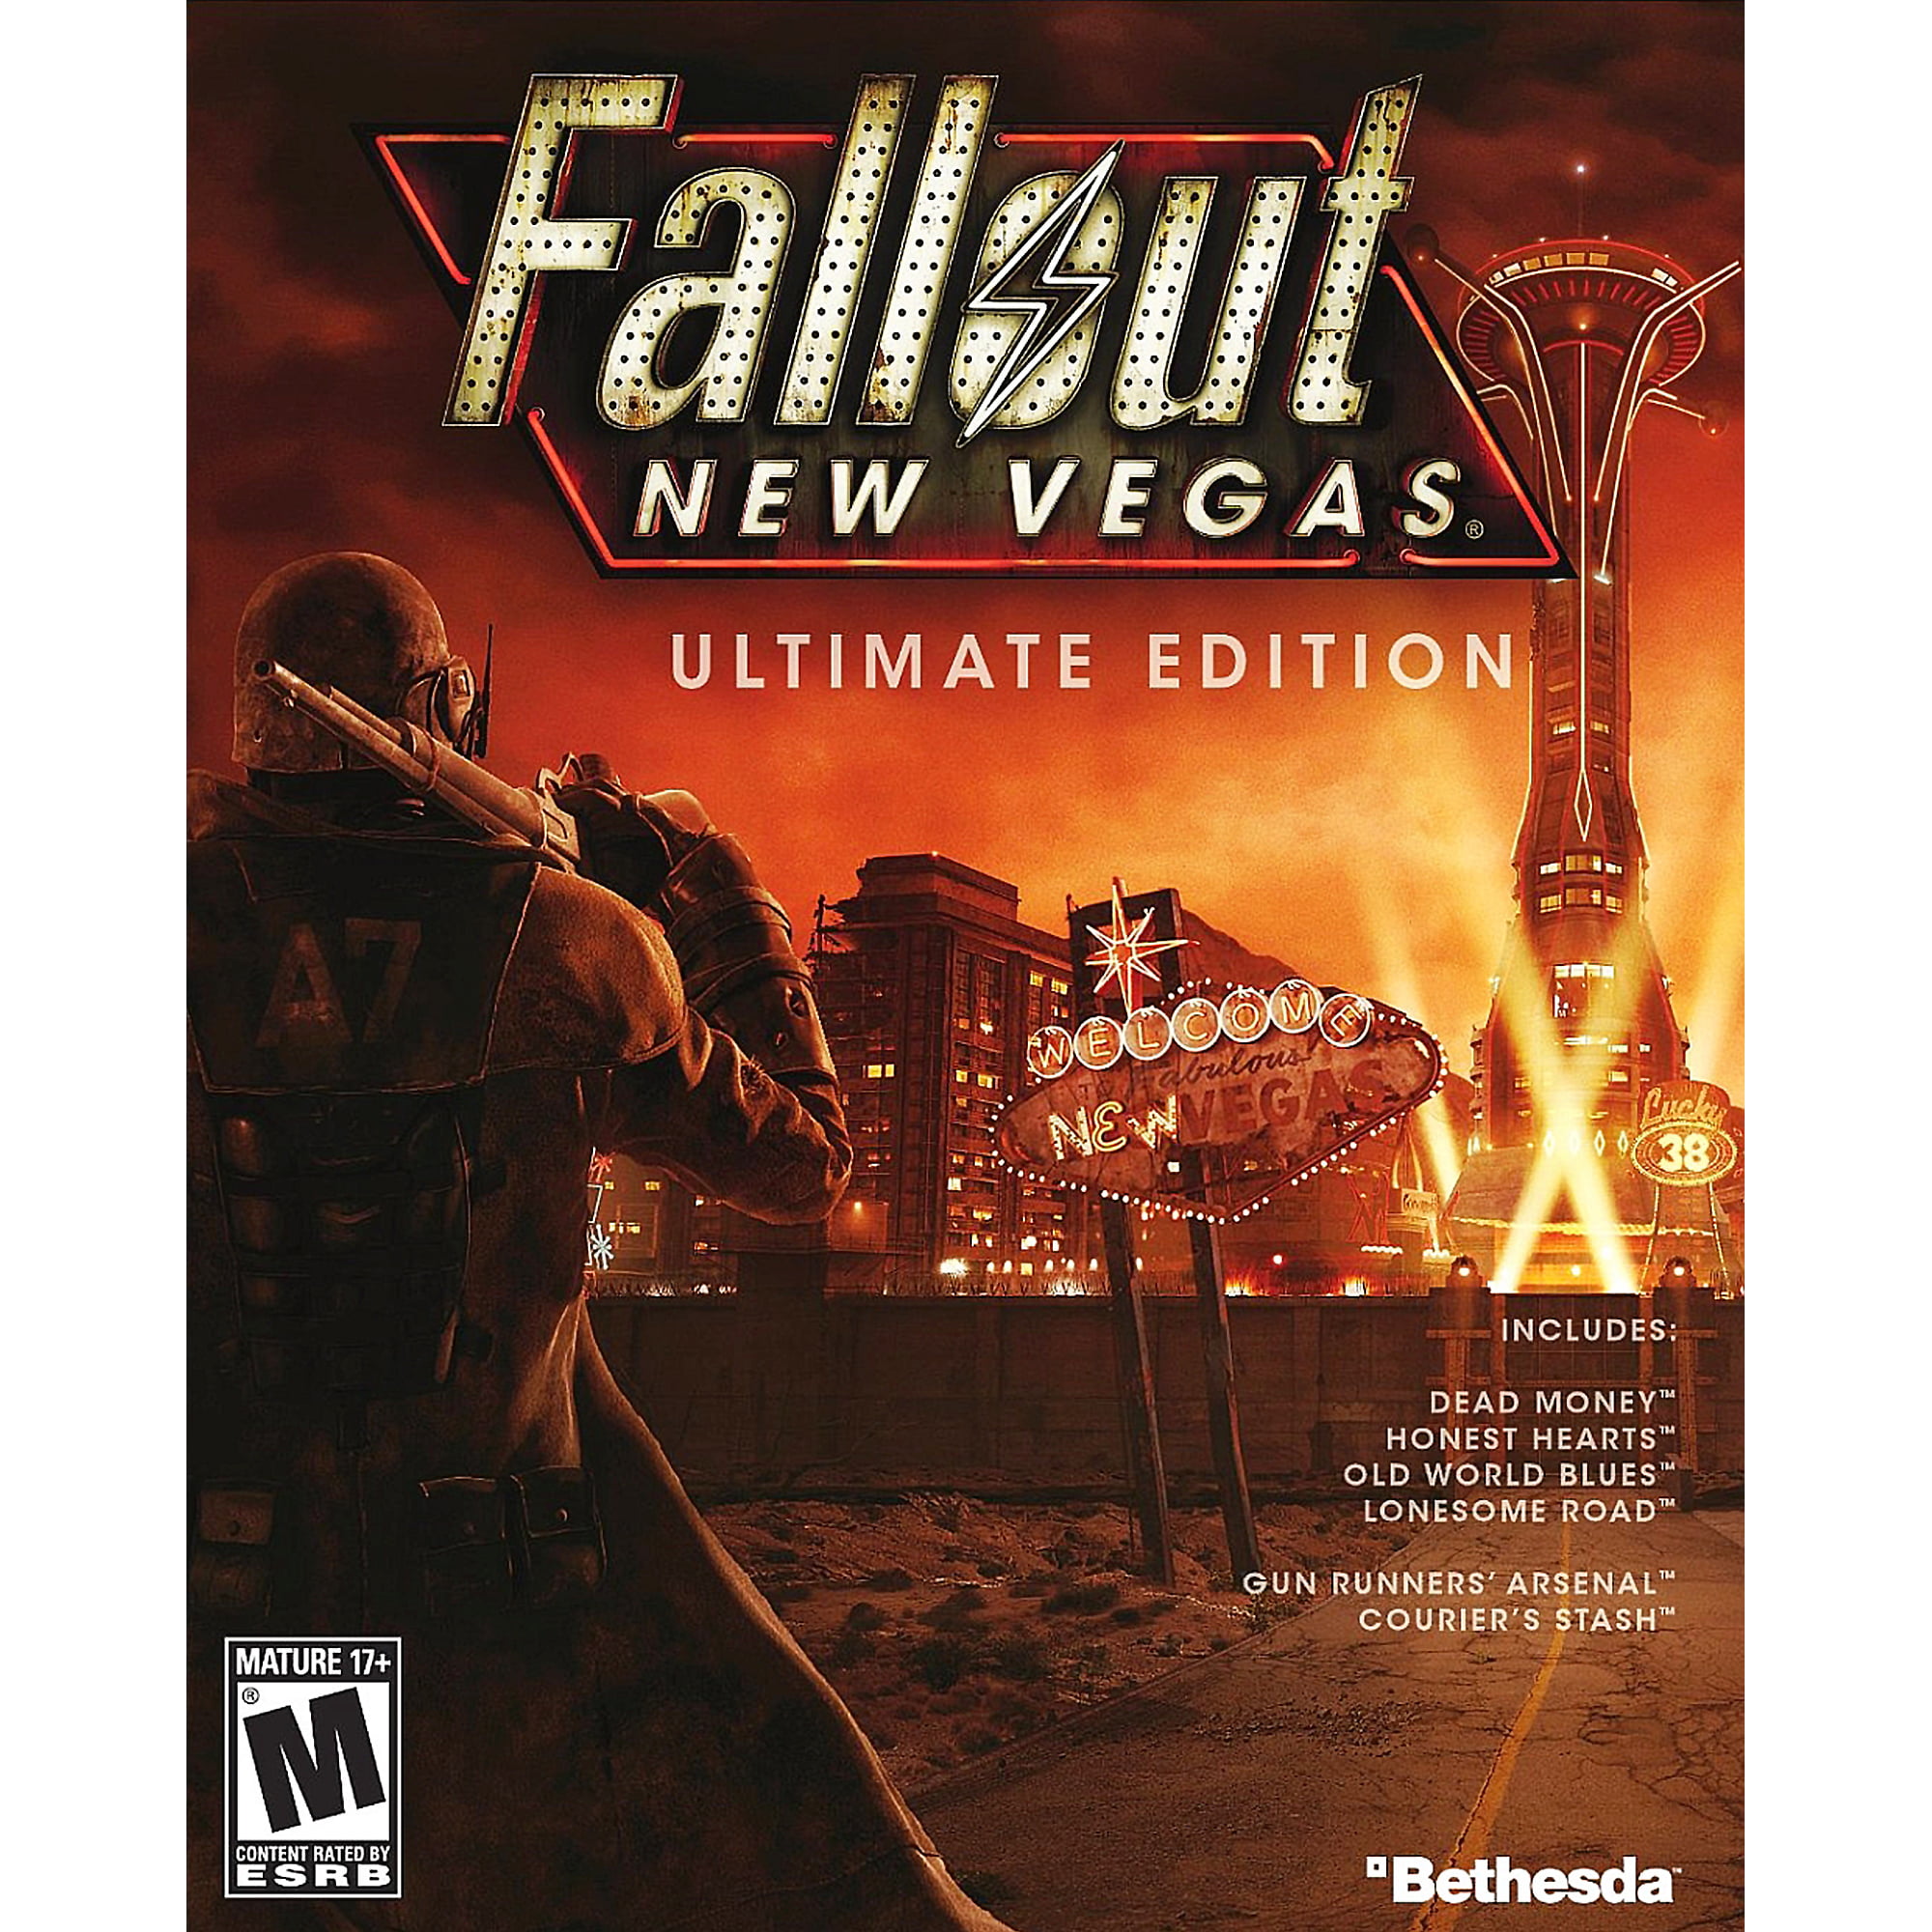 Fallout New Vegas Ultimate Edition Bethesda Pc Digital Download 818858025249 Walmartcom - roblox games california air courier